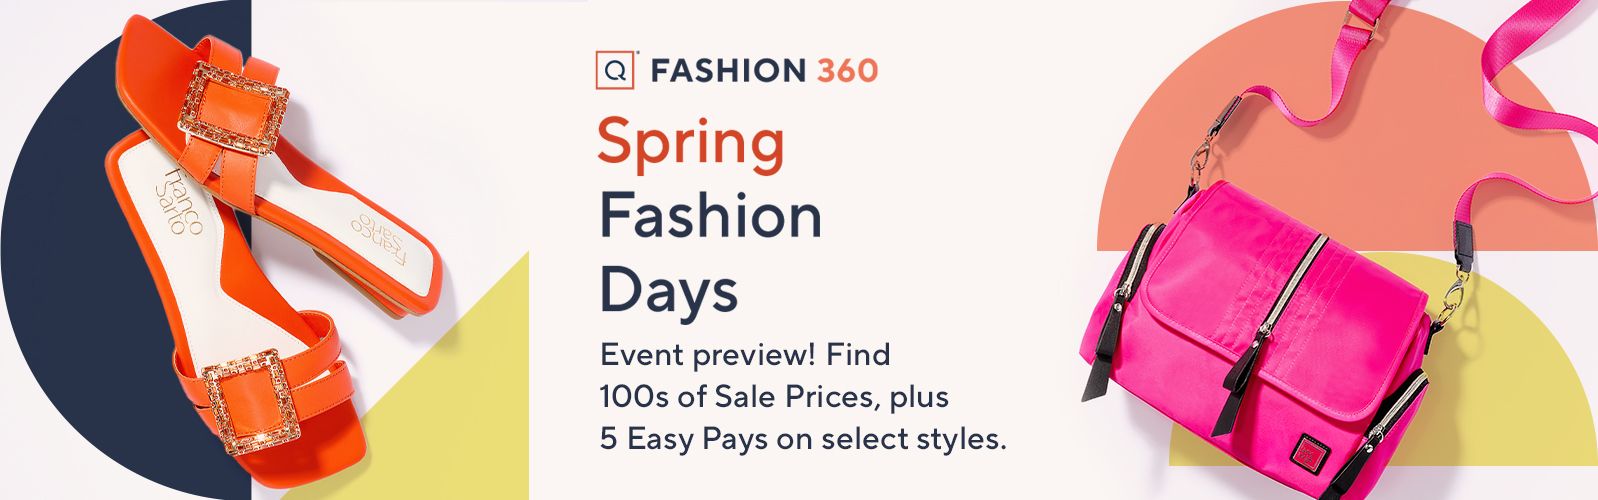 QVC's Fashion 360—Spring Fashion Days:  Event preview! Find Sale Prices on 100s of designs, plus 5 Easy Pays on select styles thru 2/10 at 11:59pm ET. 